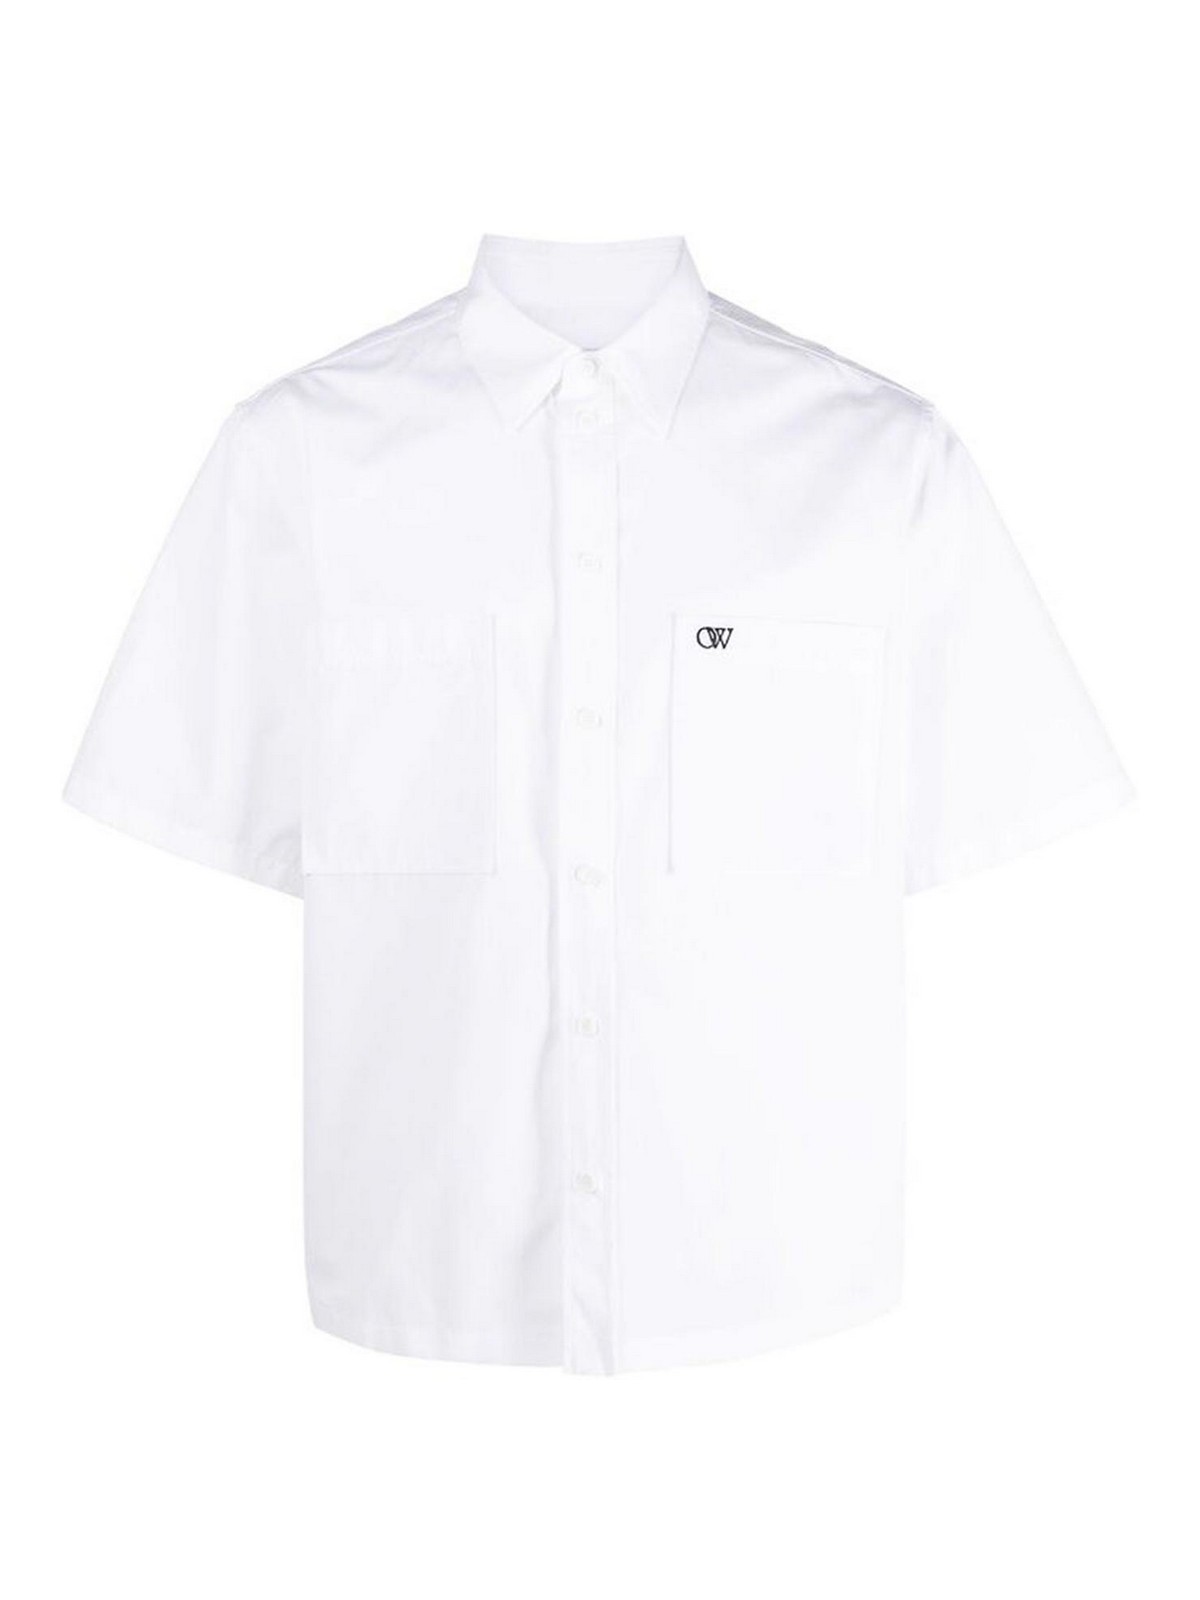 OFF-WHITE WHITE EMBROIDERED BUTTON SHIRT